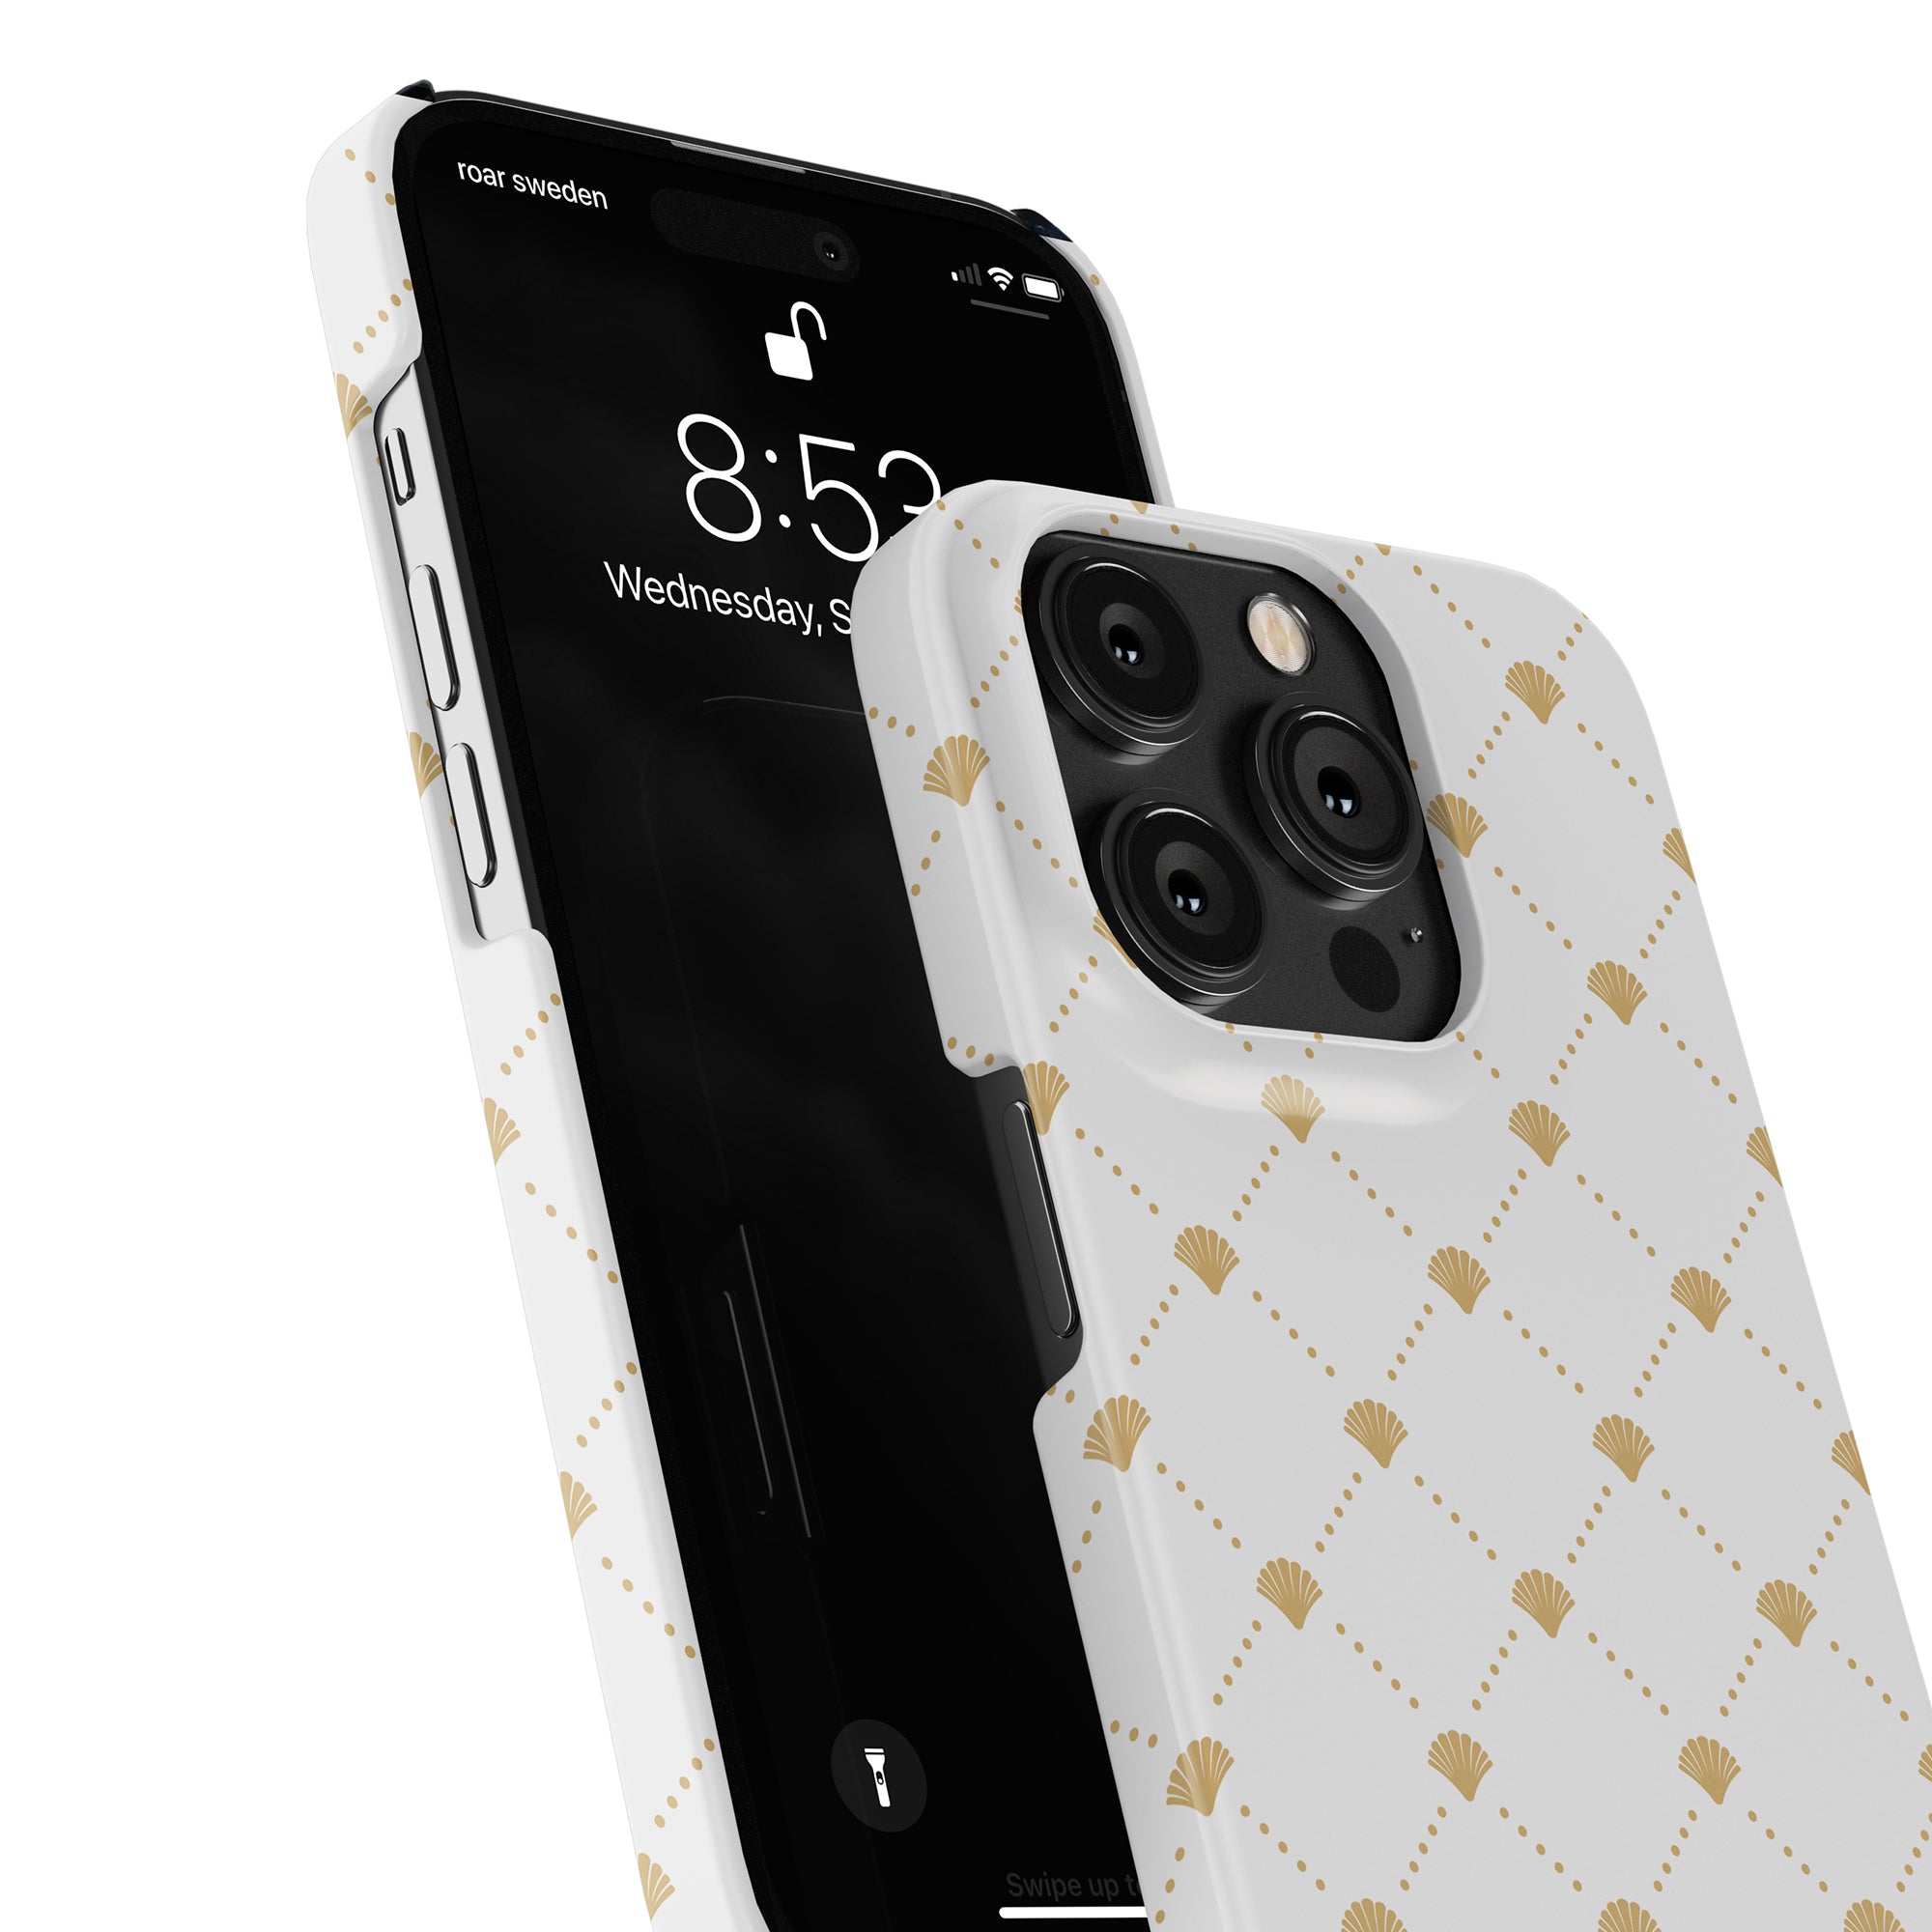 A close-up of a smartphone with a Luxe Shells White - Slim case from the Ocean Collection, featuring a white and gold patterned design reminiscent of gyllene snäckskal. The phone screen displays the time as 8:53 and the date as Wednesday, September 7.